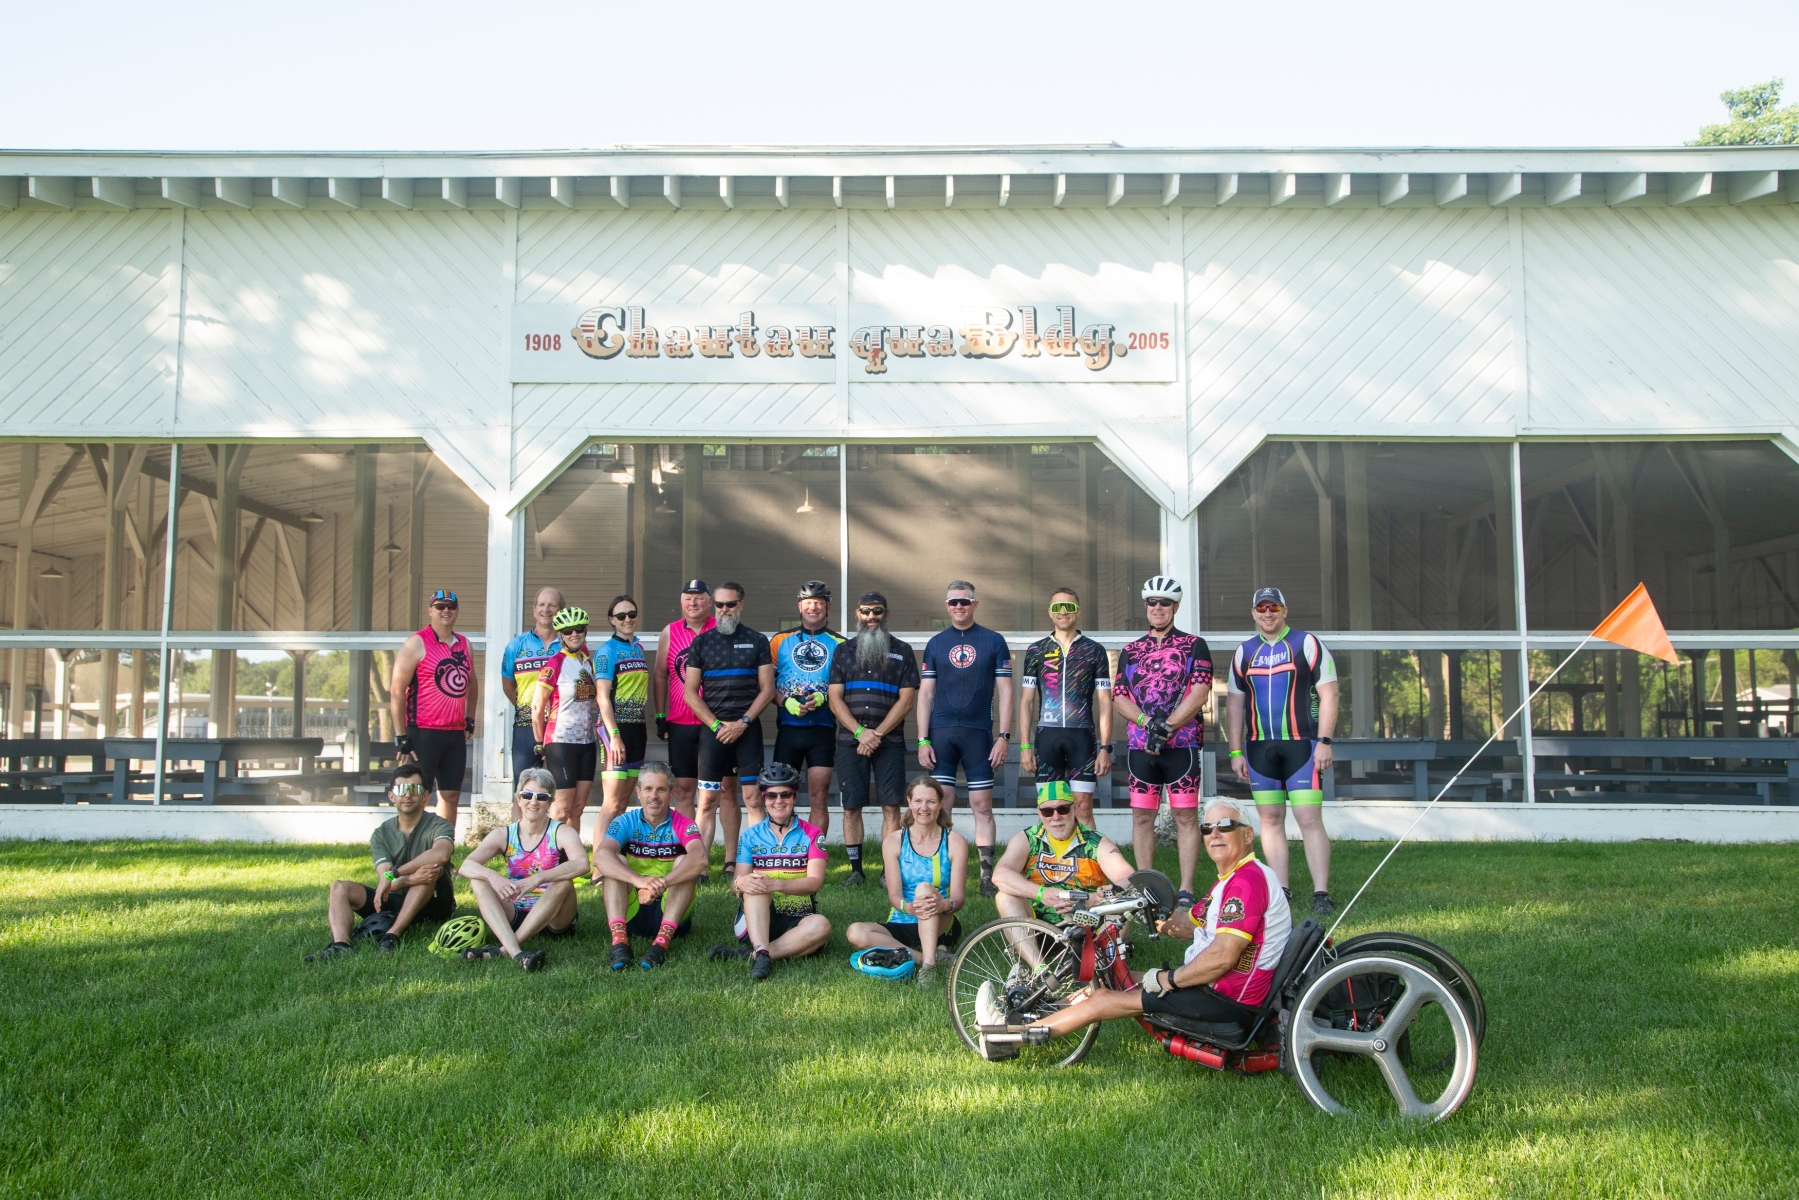 Cyclists on the RAGBRAI route inspection ride pose for a photo before leaving Sac City on Monday, June 7, 2021.